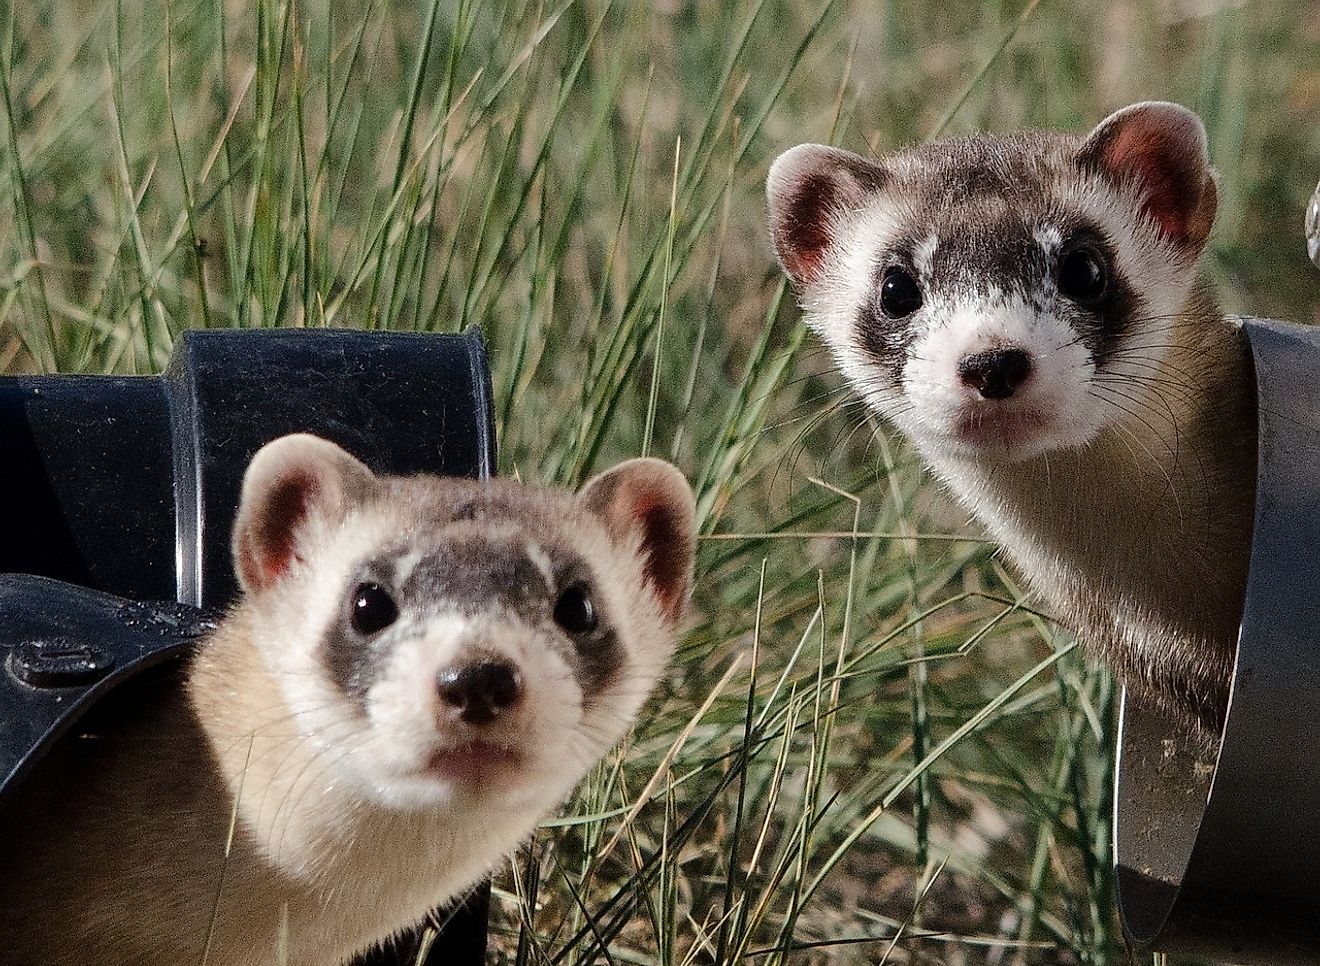 Ferrets are also not safest options as pets. Image credit: Skeeze from Pixabay.